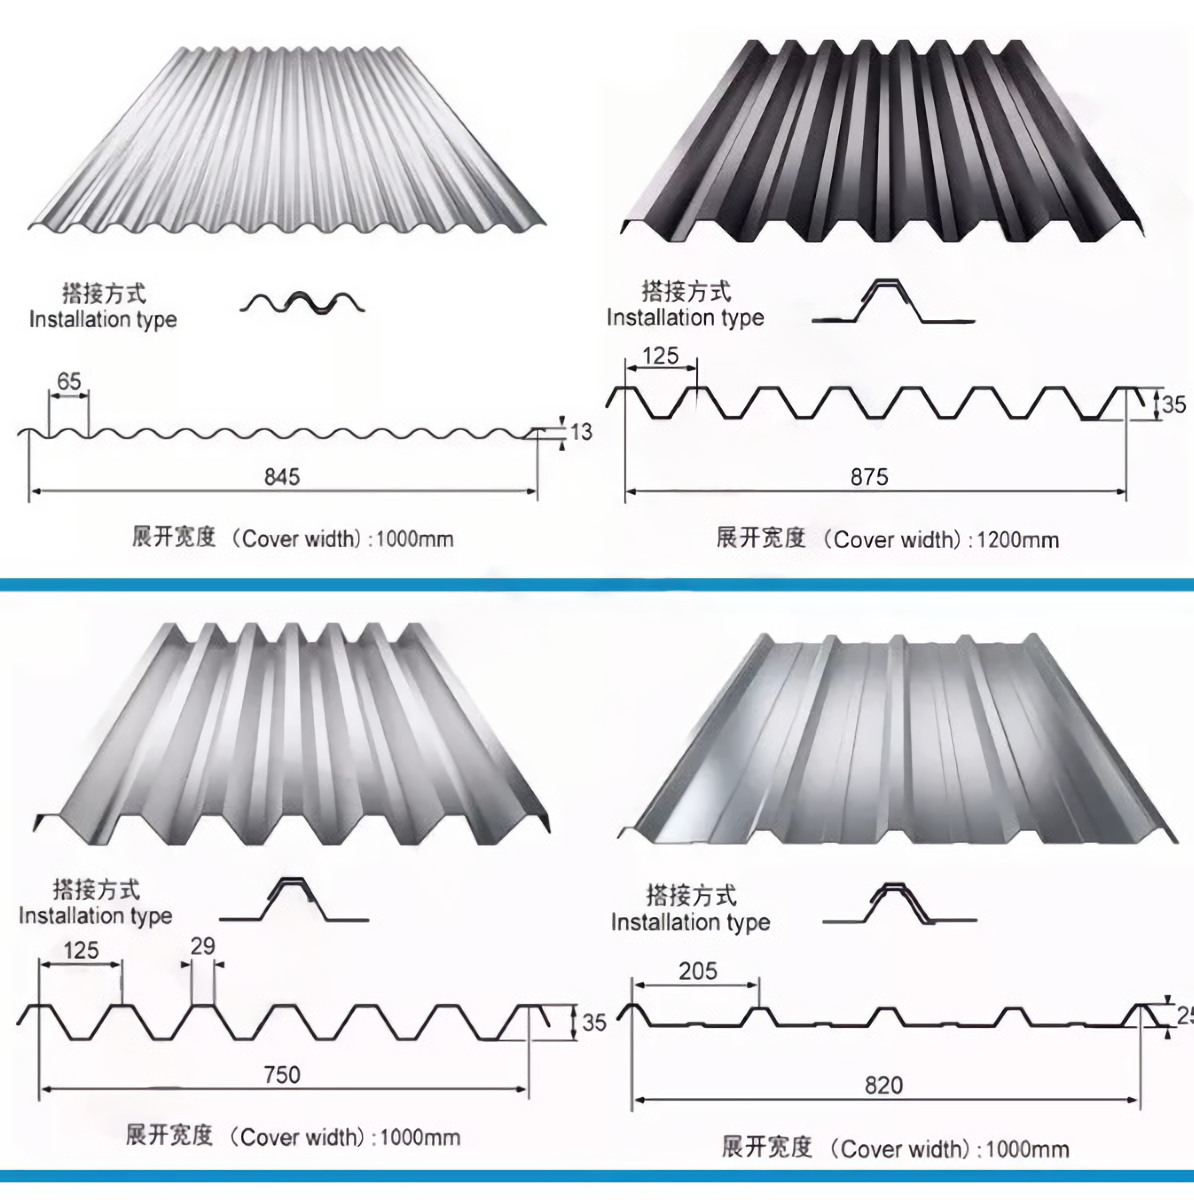 Aluminum Roofing Sheets Tile Types